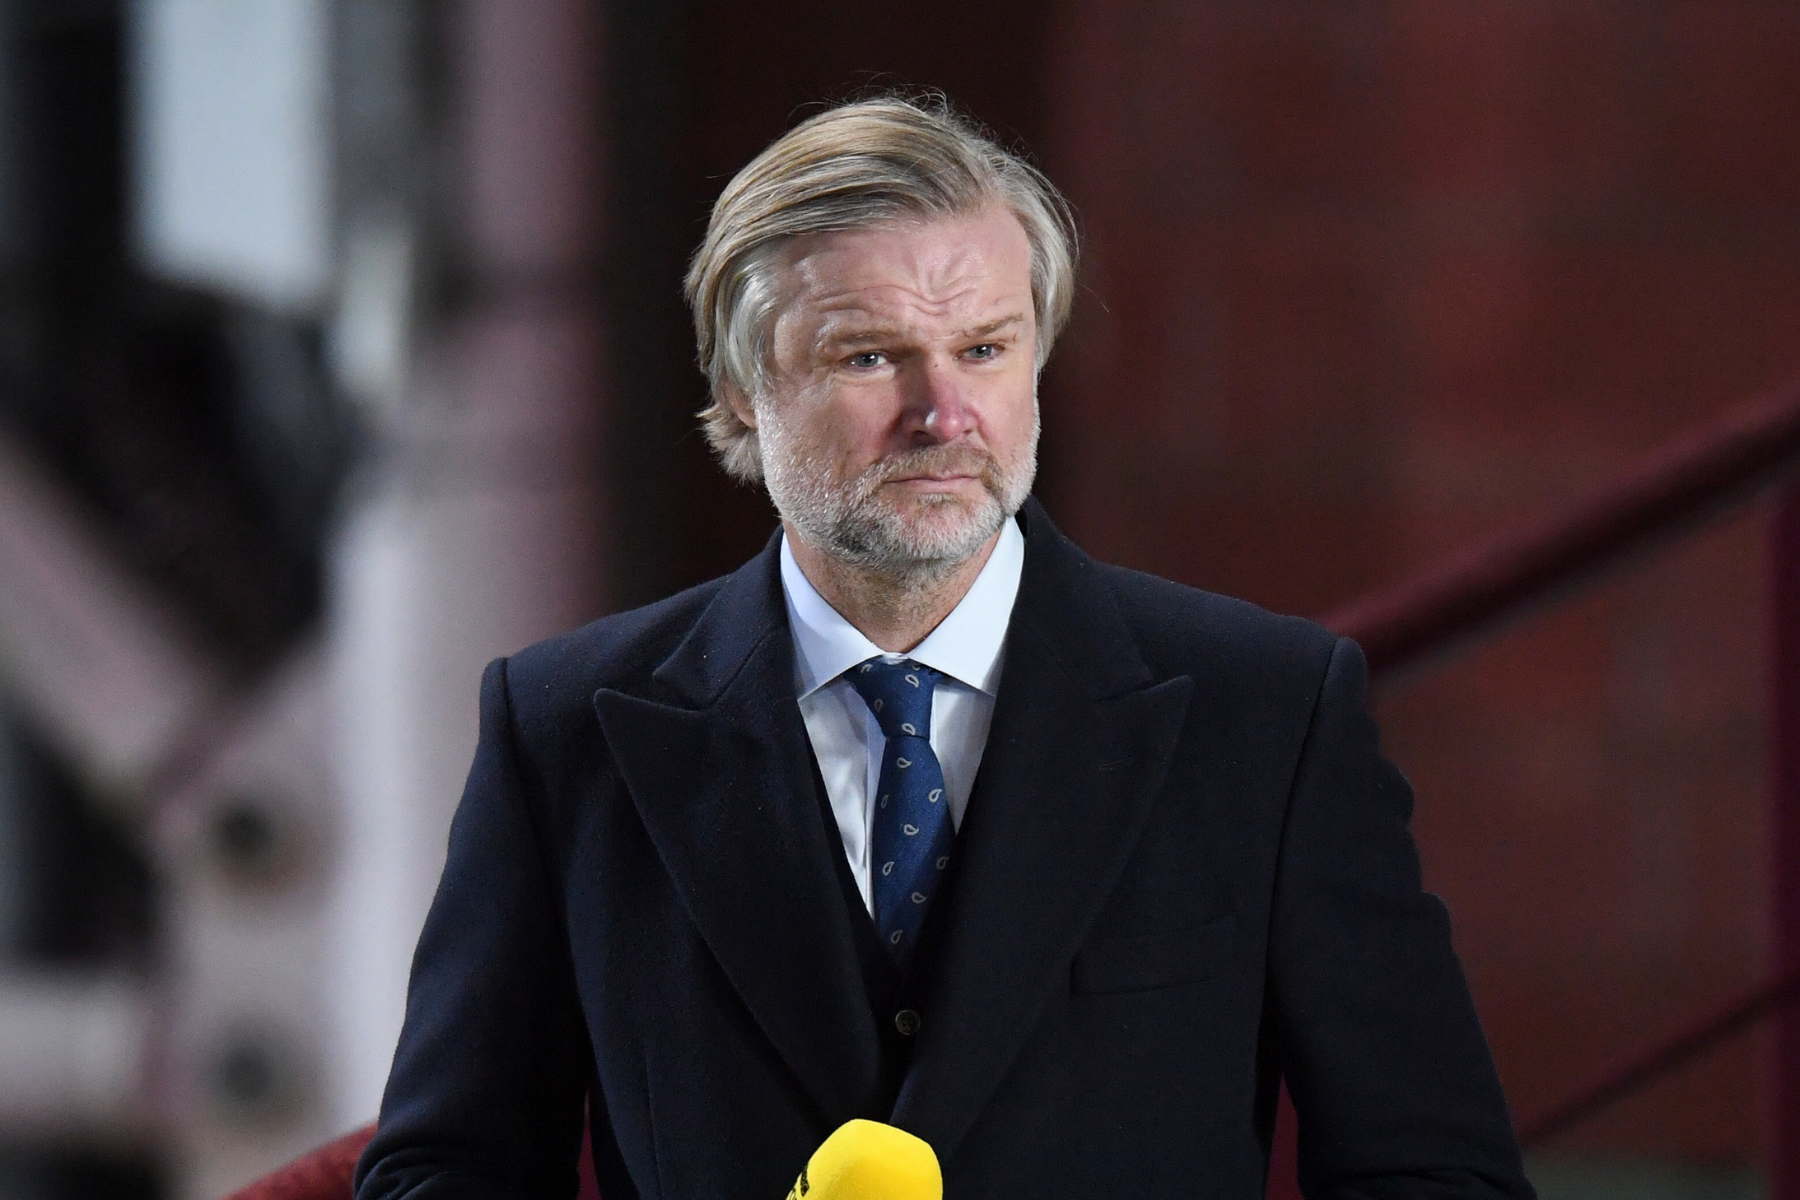 Steven Pressley throws hat into the ring for Aberdeen job after McInnes departure